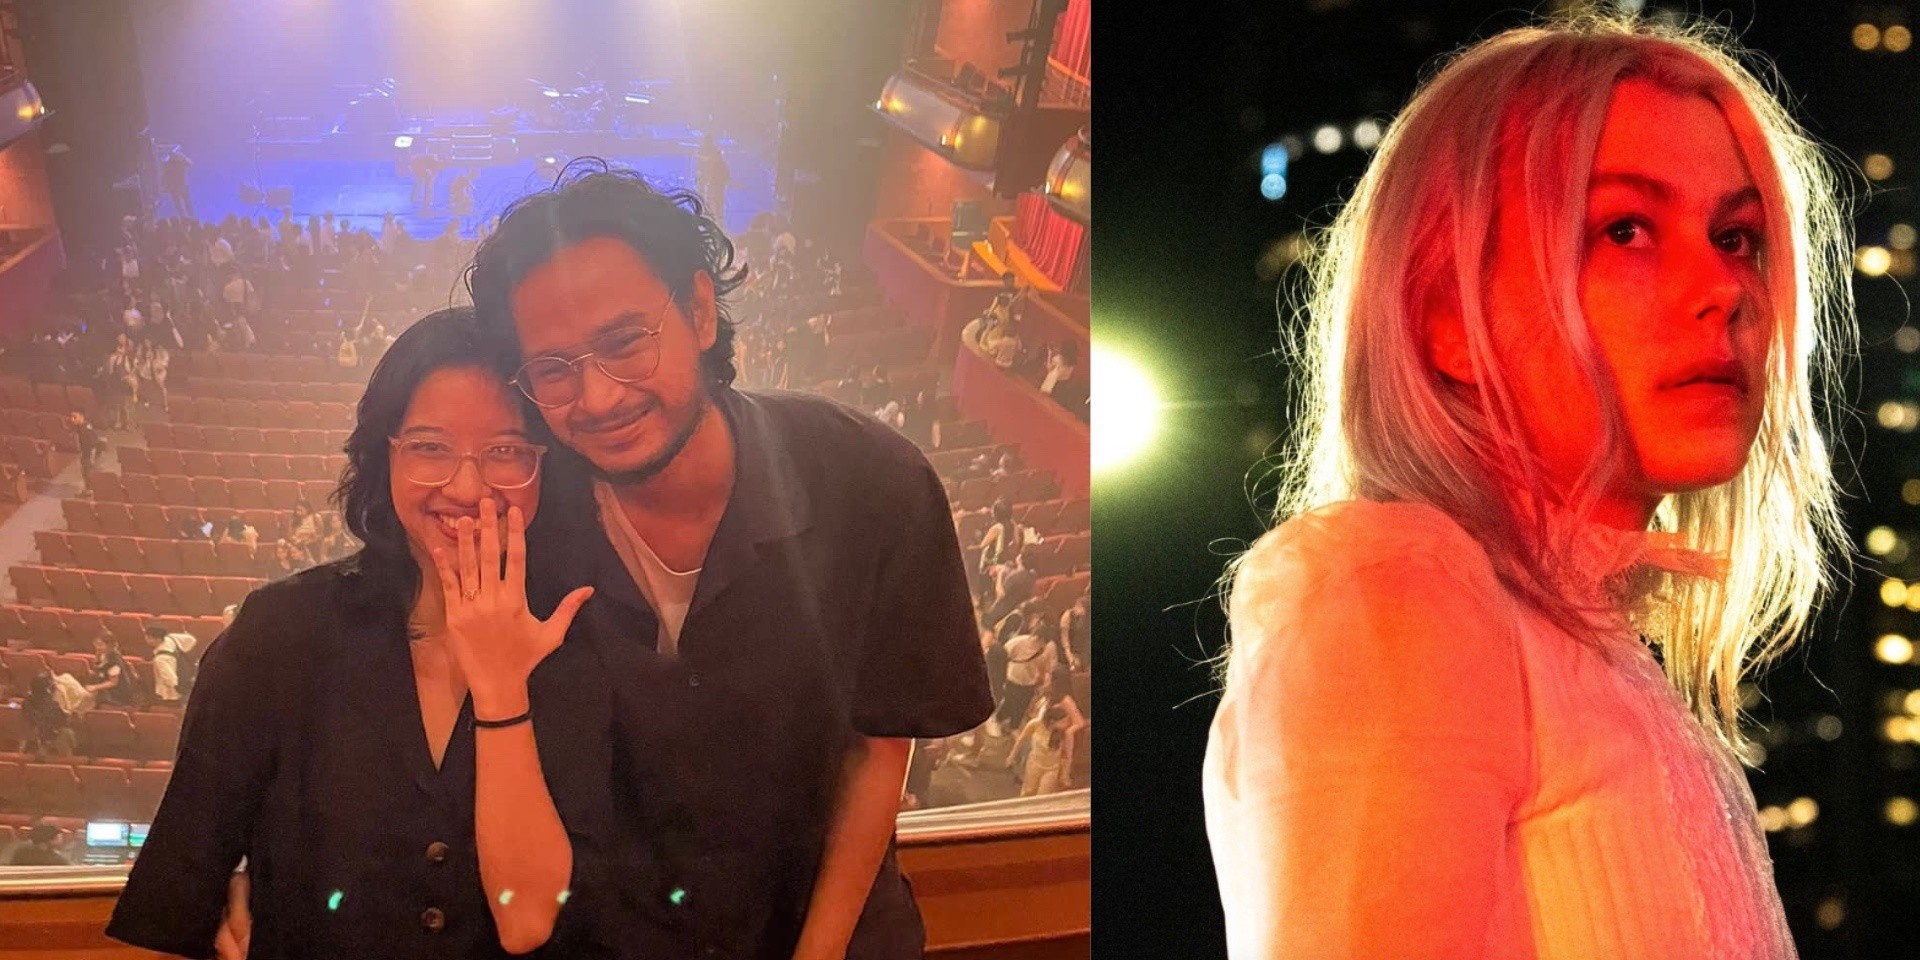 Fans of Phoebe Bridgers get engaged at singer-songwriter's Singapore concert